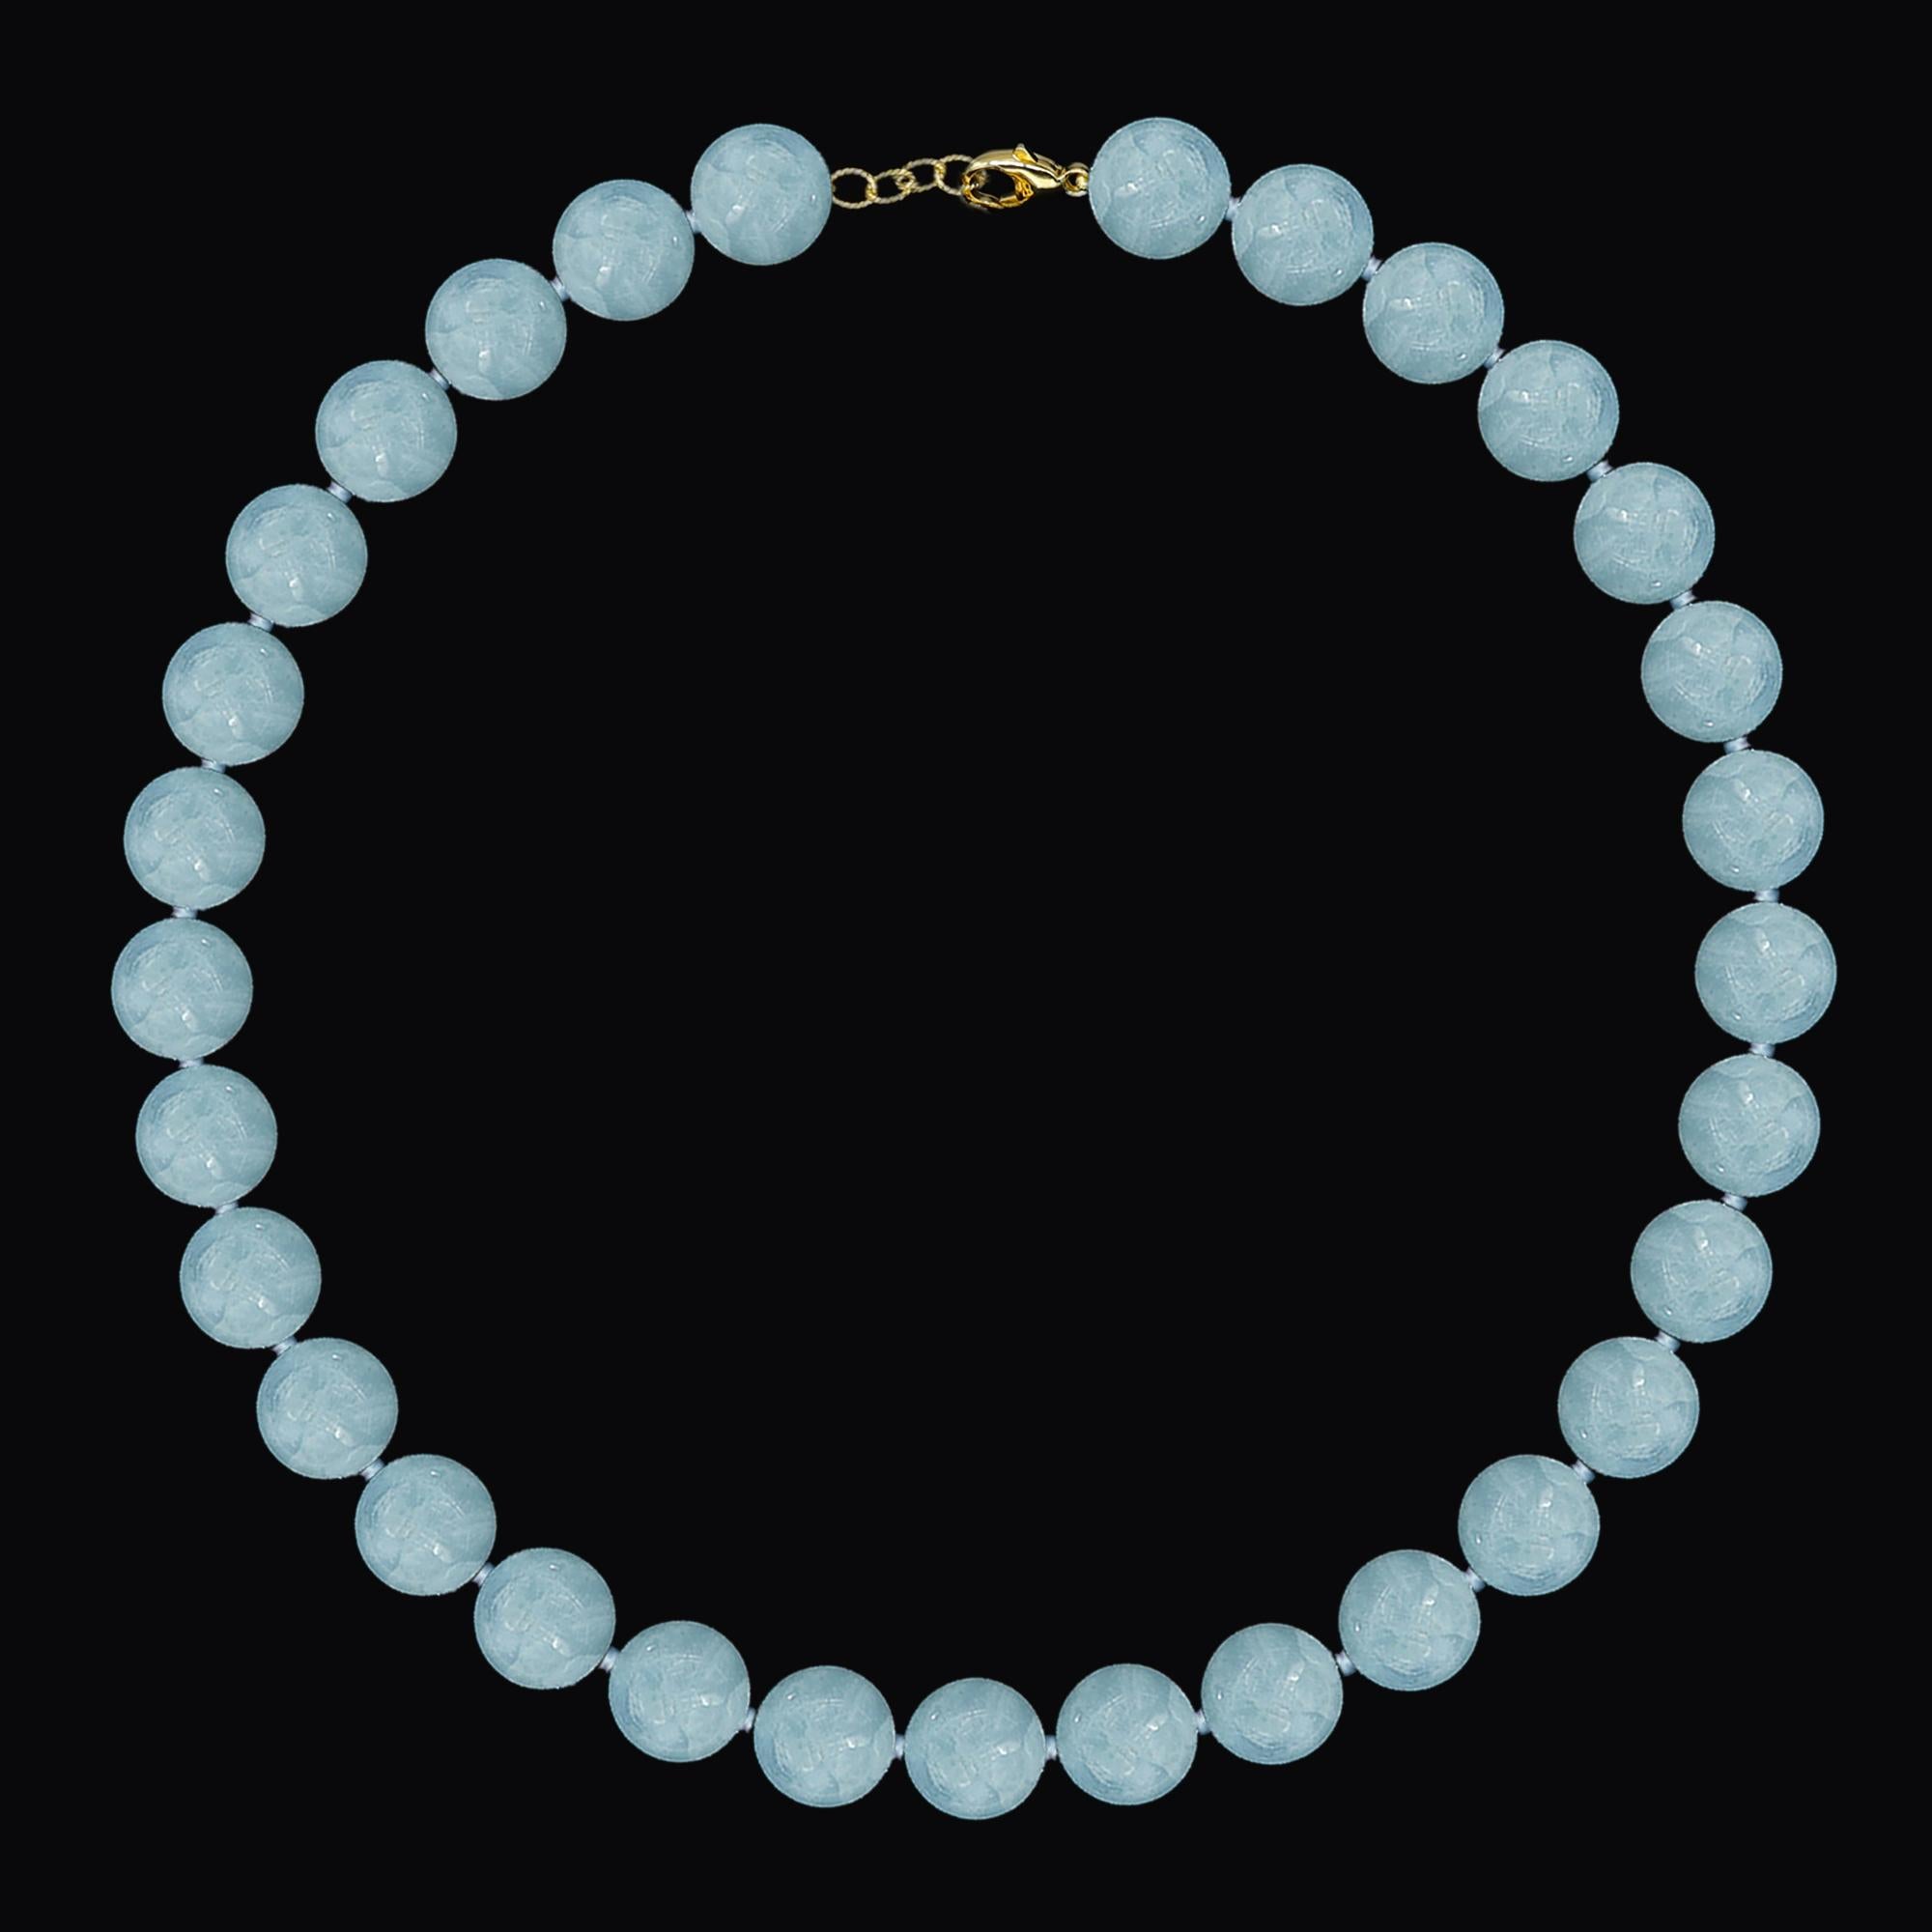 AAA Quality Aquamarine Bead Neckalce 
with 14K Yellow Gold Lock & Extension
adustable length  15.5' - 17.5' Inches
Bead size: 10 mm 
Rich Light blue color tone - very classic 
+ Gift box & appraisal